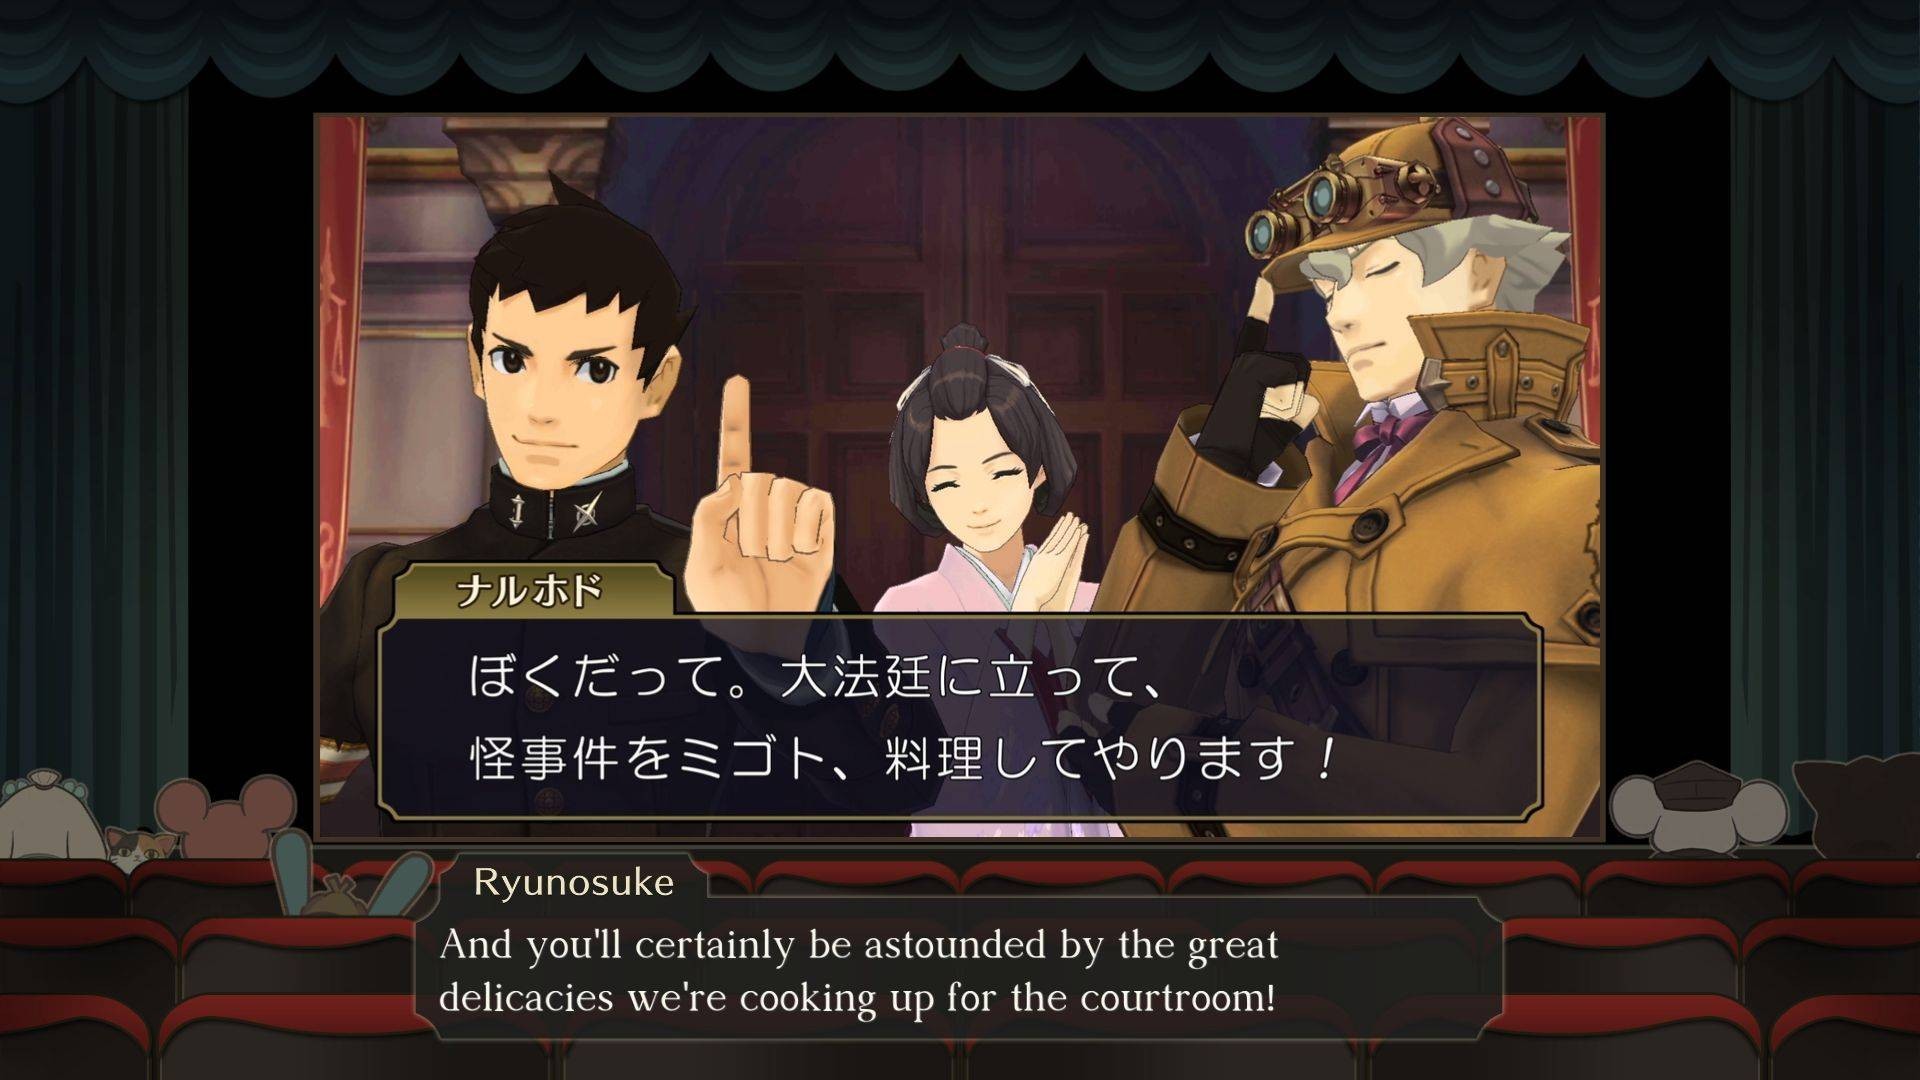 Gamers - The Great Ace Attorney Chronicles 💻 ORDER ONLINE